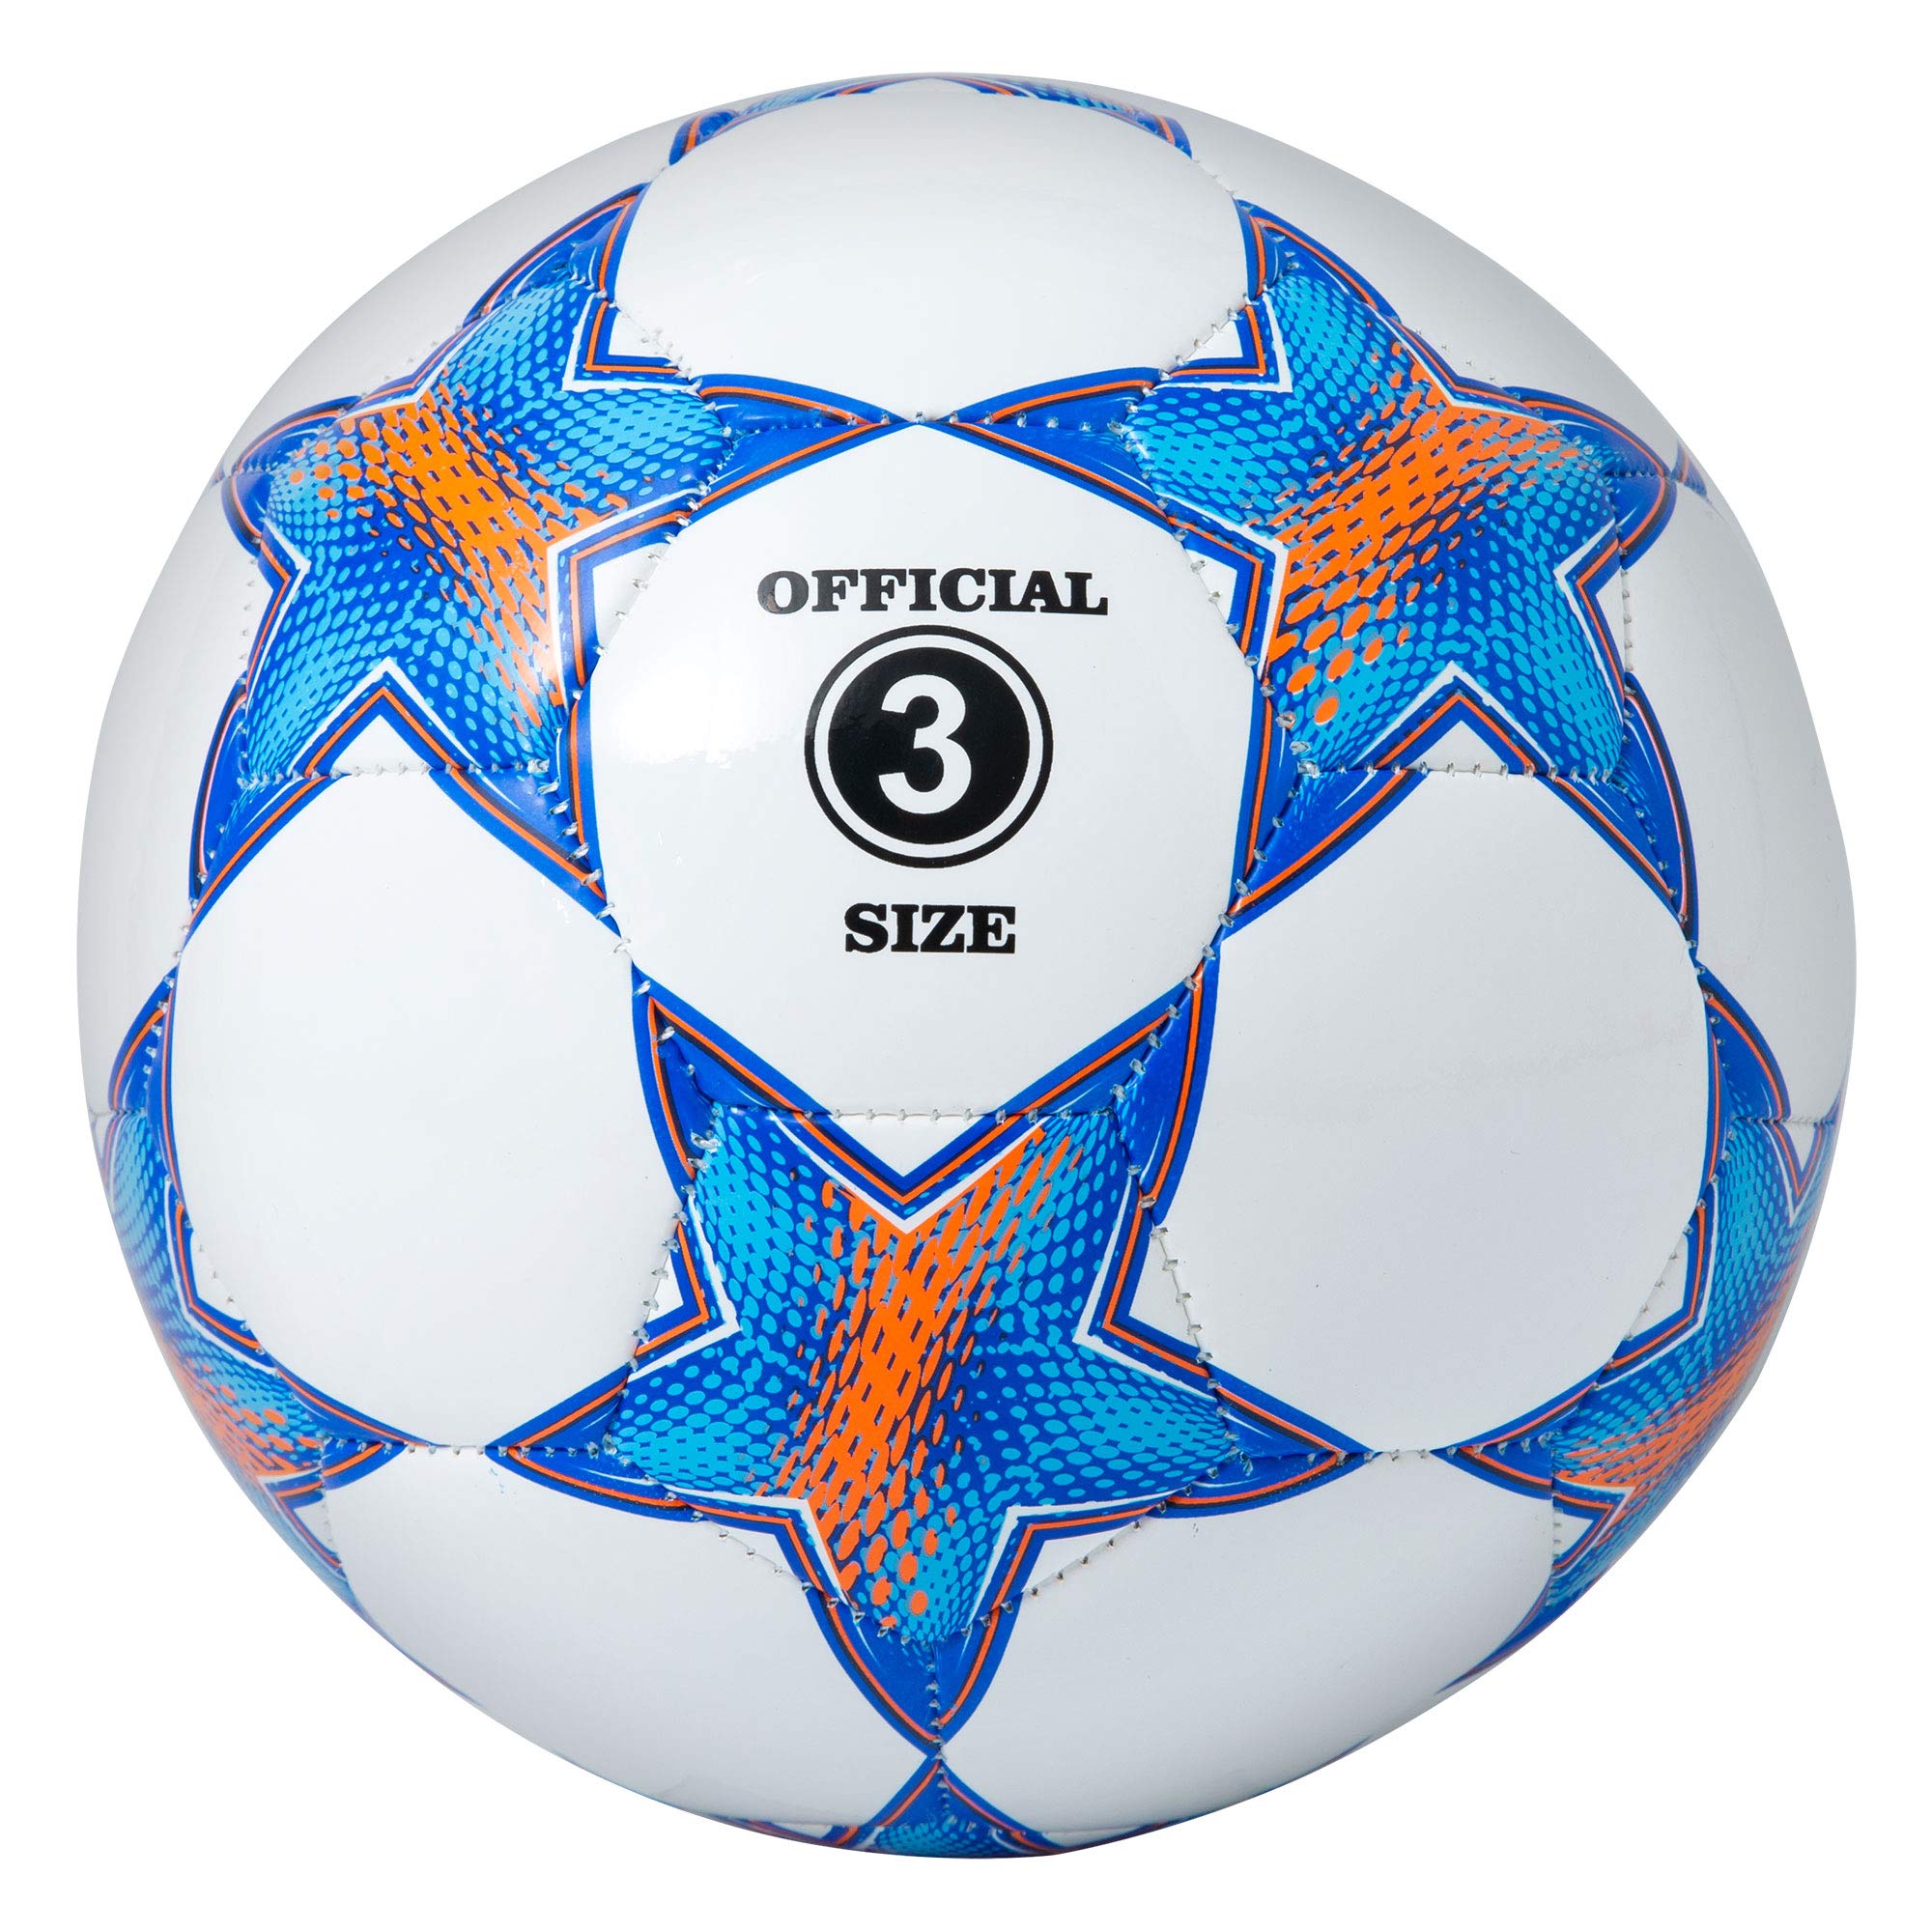 Runleaps Soccer Ball Size 3 for Kids, Ball Toys with Star Pattern Official Size Soccer Balls for Training, Playing, Boys, girls,